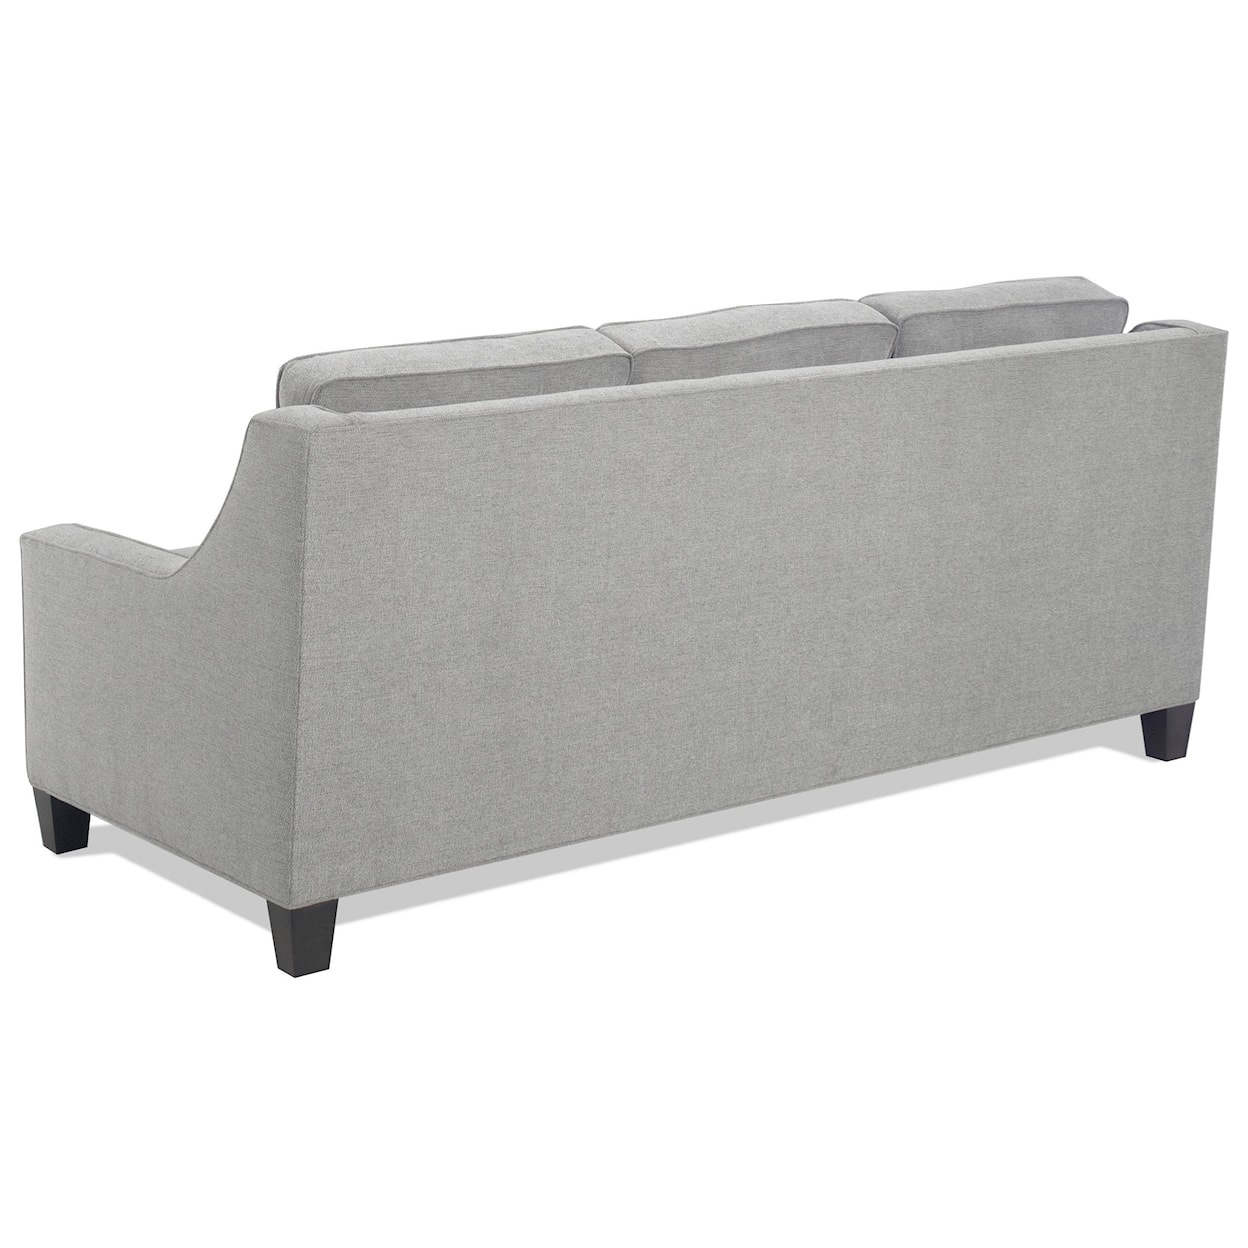 Temple Furniture Brody Stationary Sofa